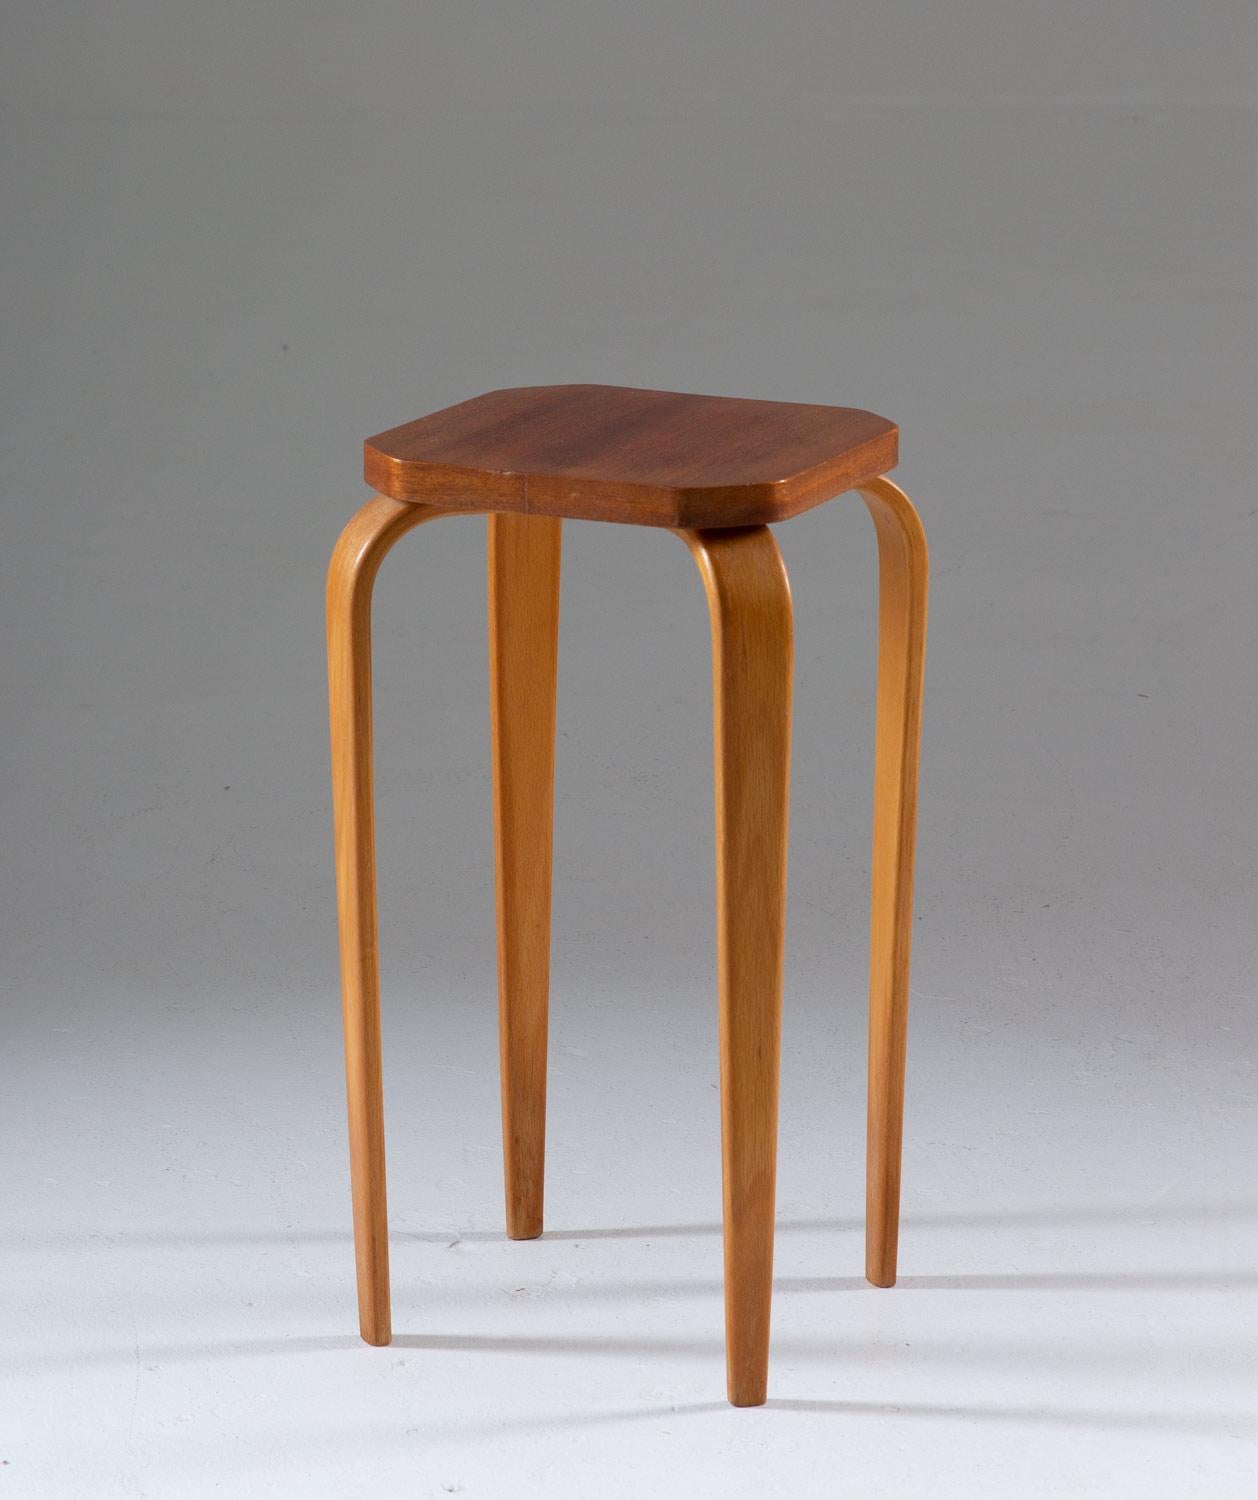 Stool or pedestal in mahogany and beech, possibly designed by G-A Berg, Sweden.
Condition: Very good original condition.